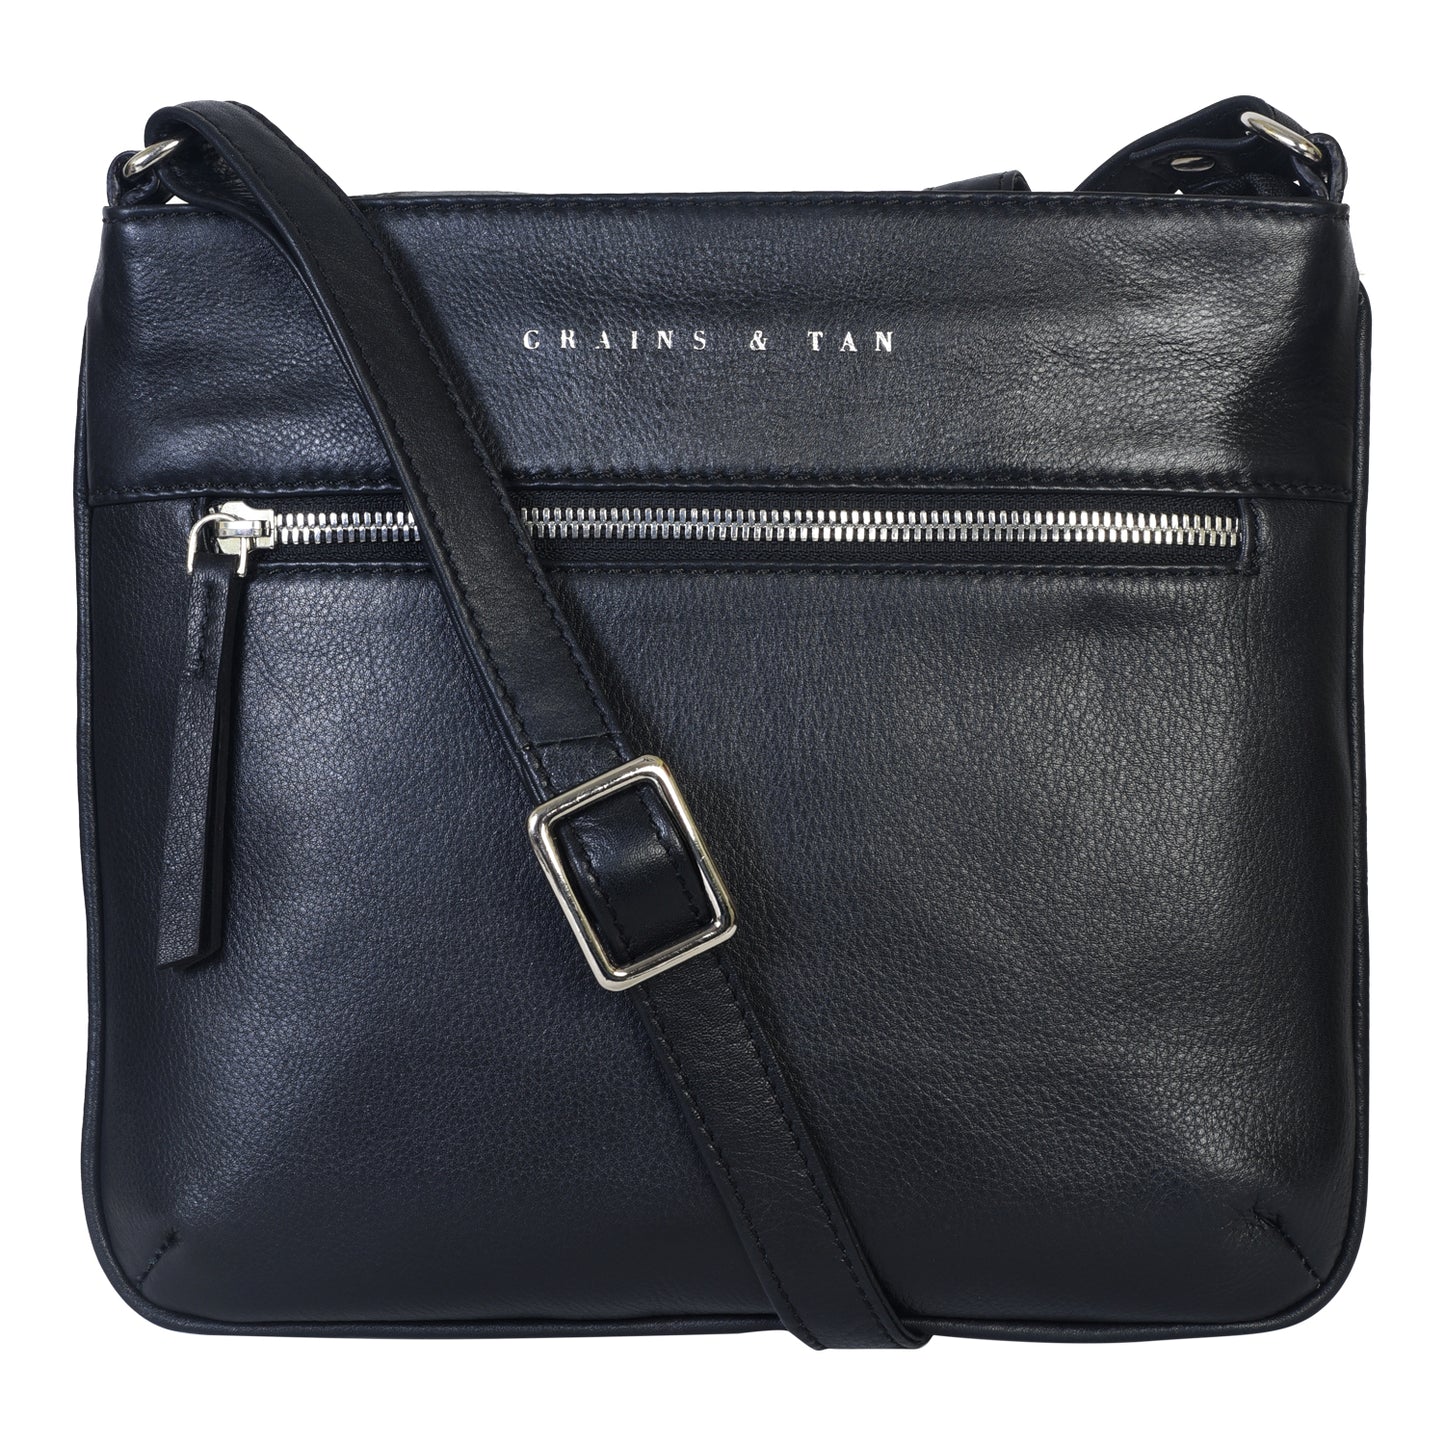 GT-018: G&T Full-grain Leather Small Crossbody Bag, Sling Bag with Long Adjustable Strap